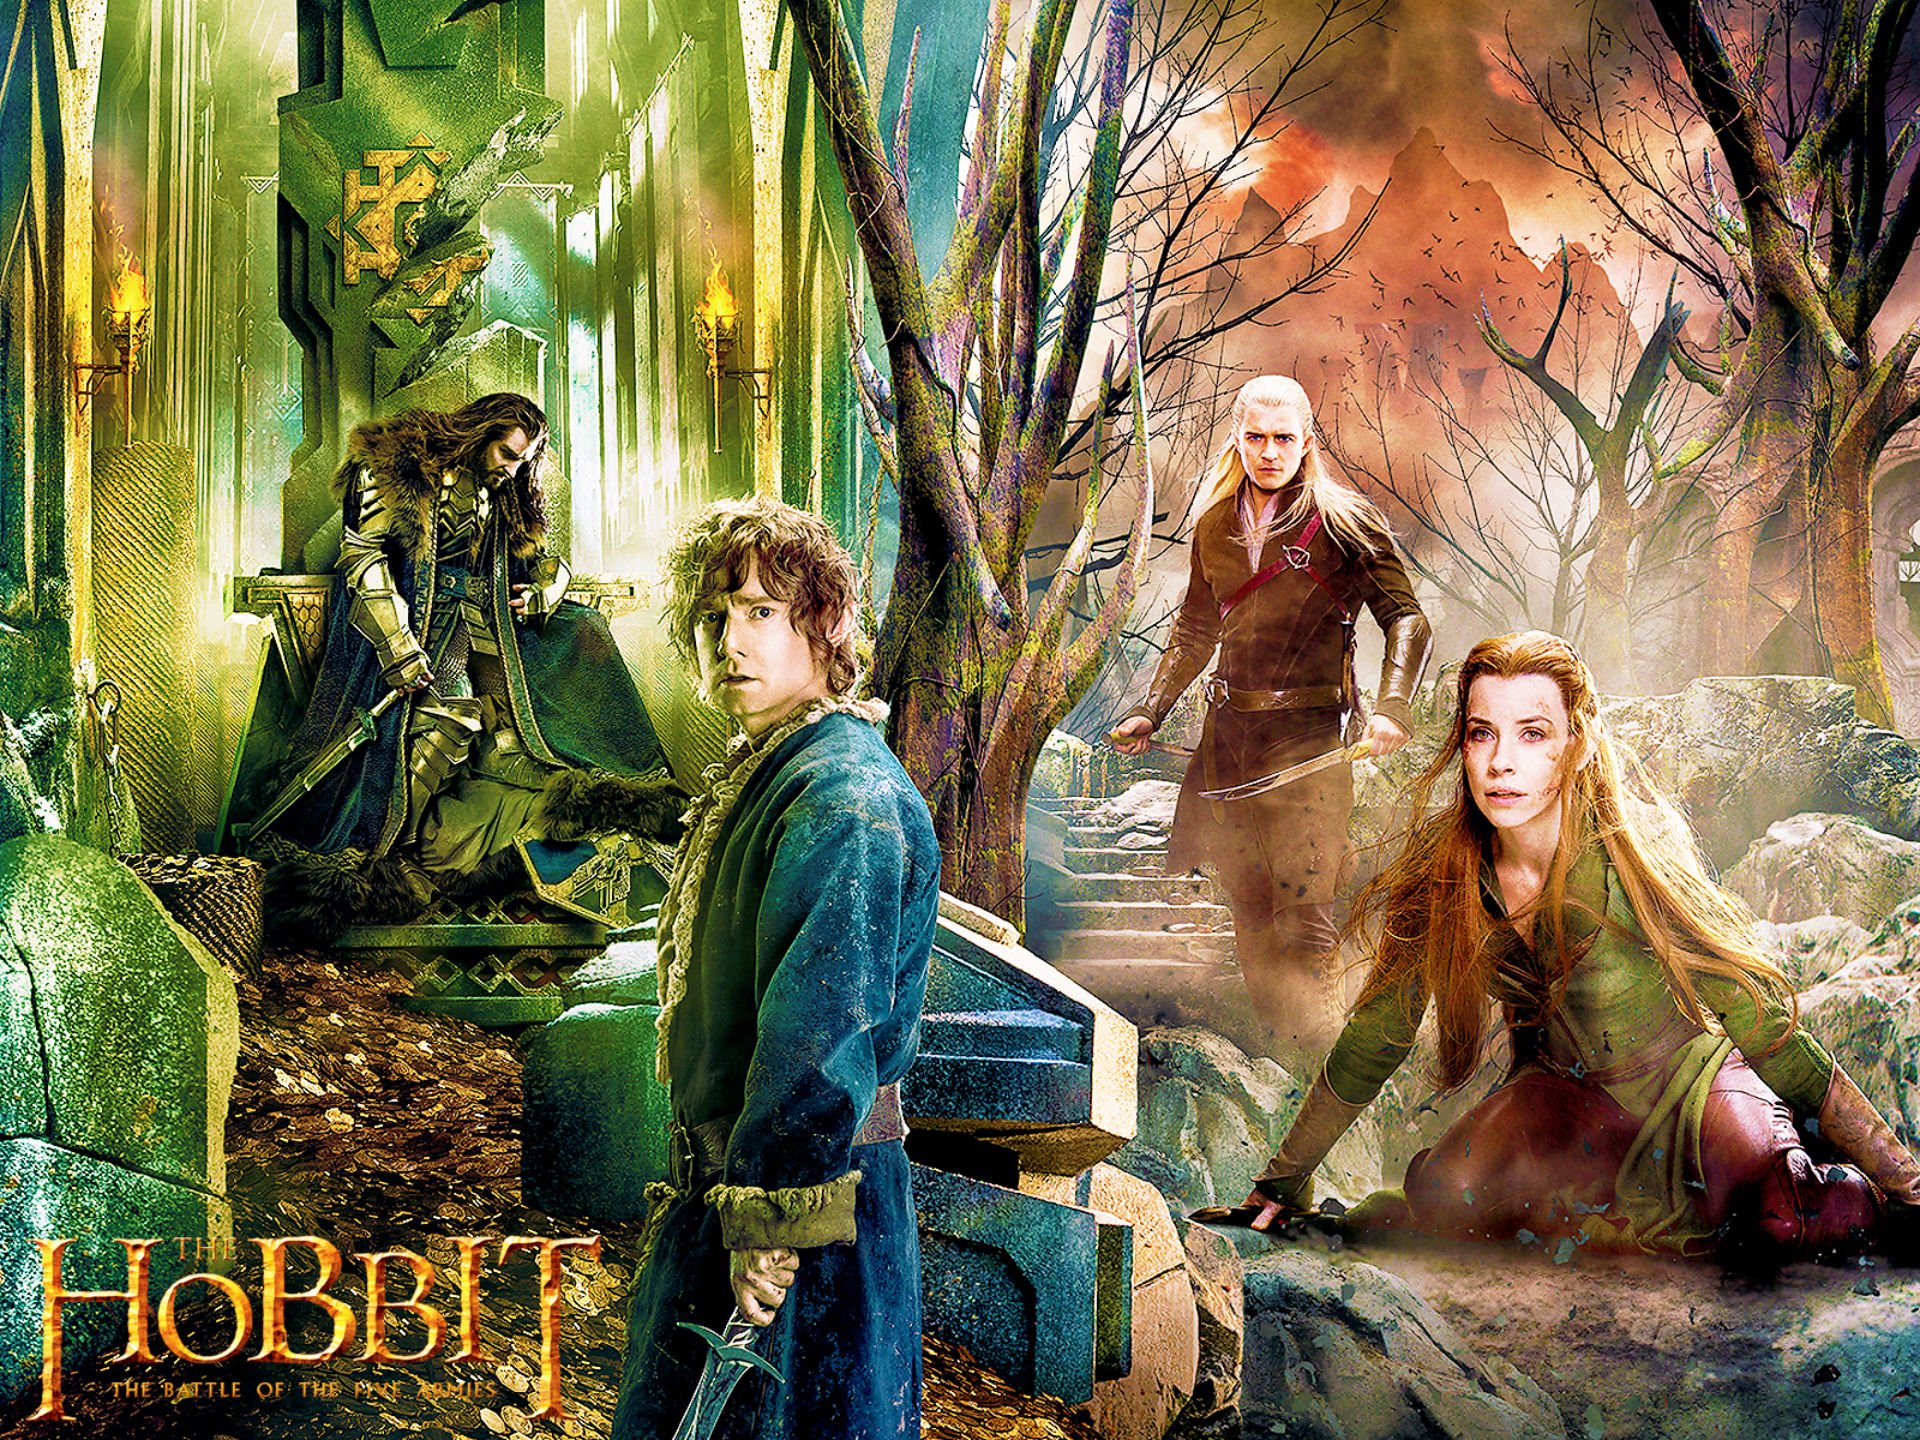 The Hobbit: The Battle of the Five Ar download the last version for ipod